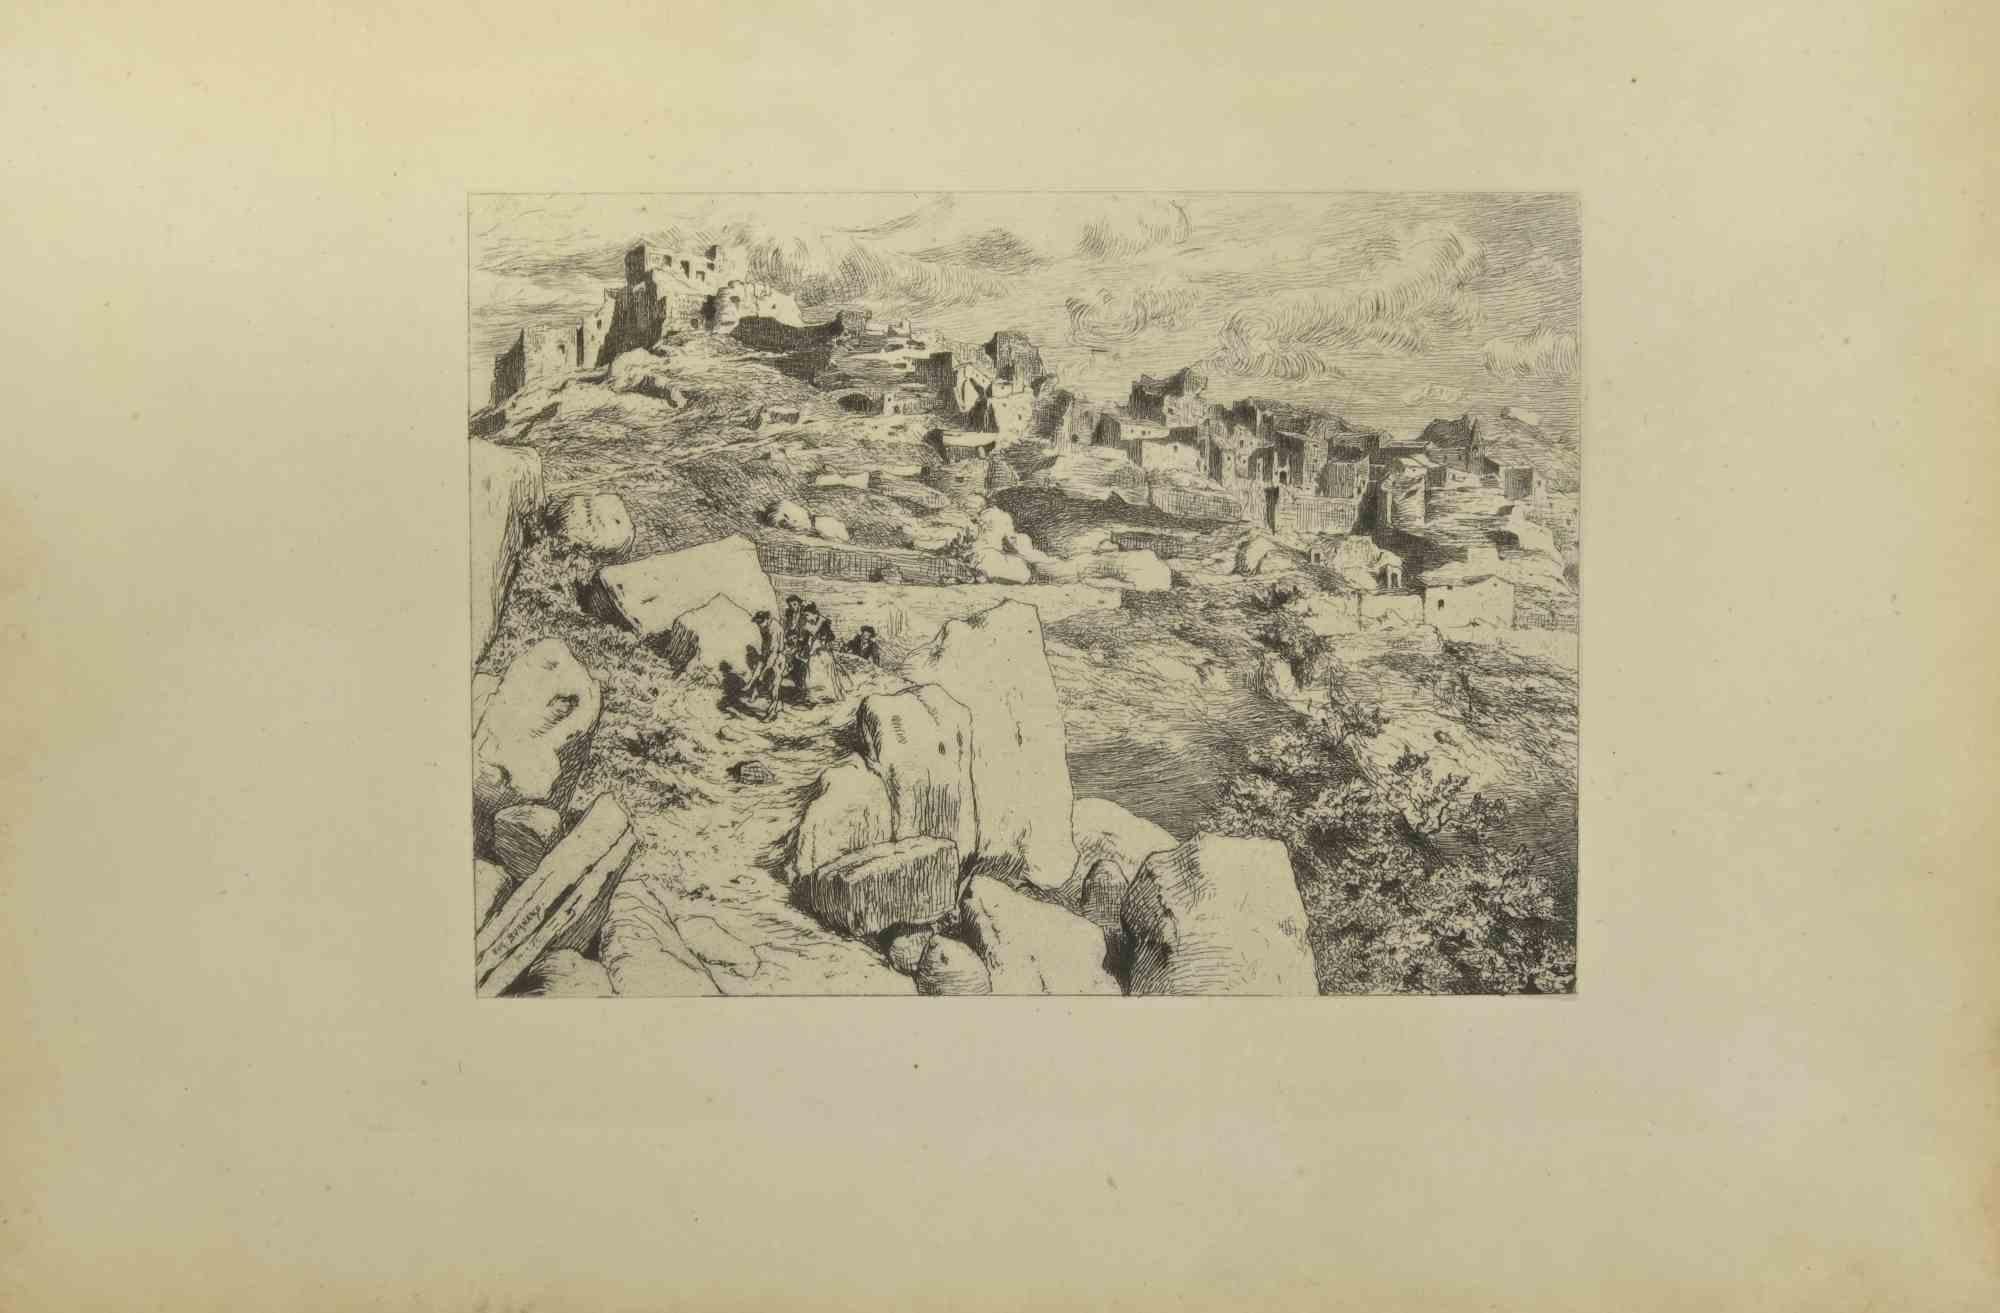 Hillside is an original etching realized by  Eugène Burnand  (1850-1921) in the Late 19th century.

Signed on the plate.

Good conditions with foxing.

The artwork is realized through short and deft strokes, an admirable scene created by realistic